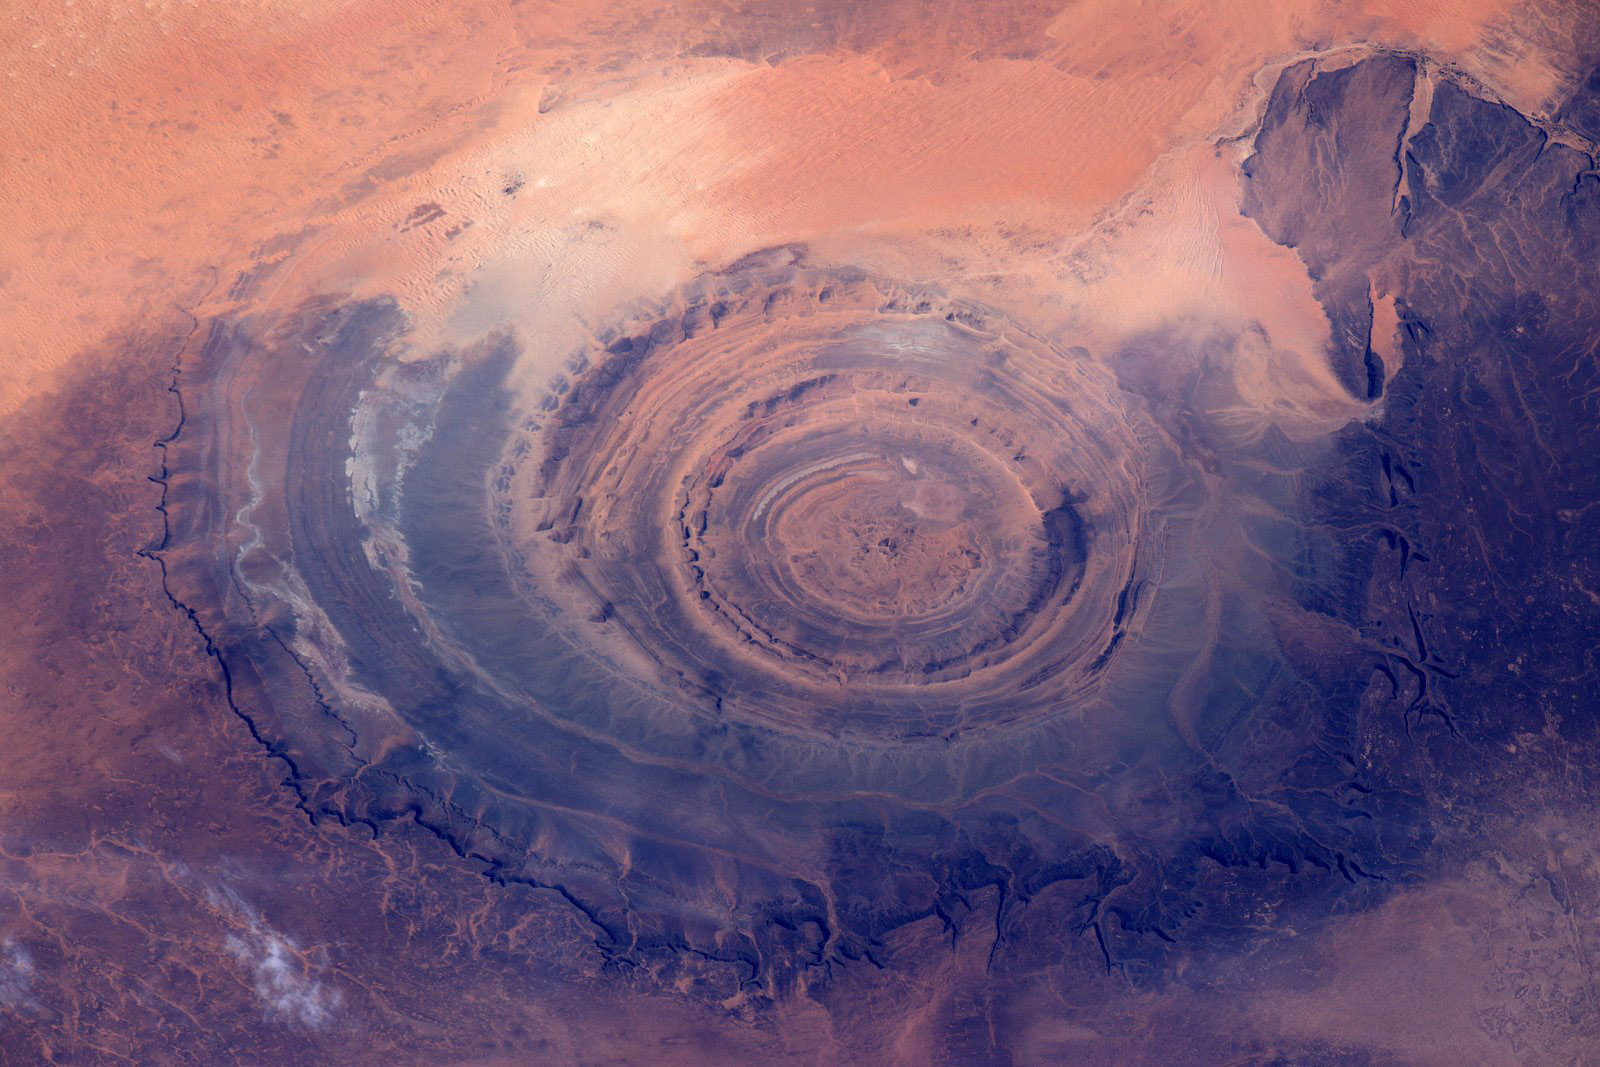 The Richat Structure or “Bulls Eye” in Mauritania. June 30, 2016.